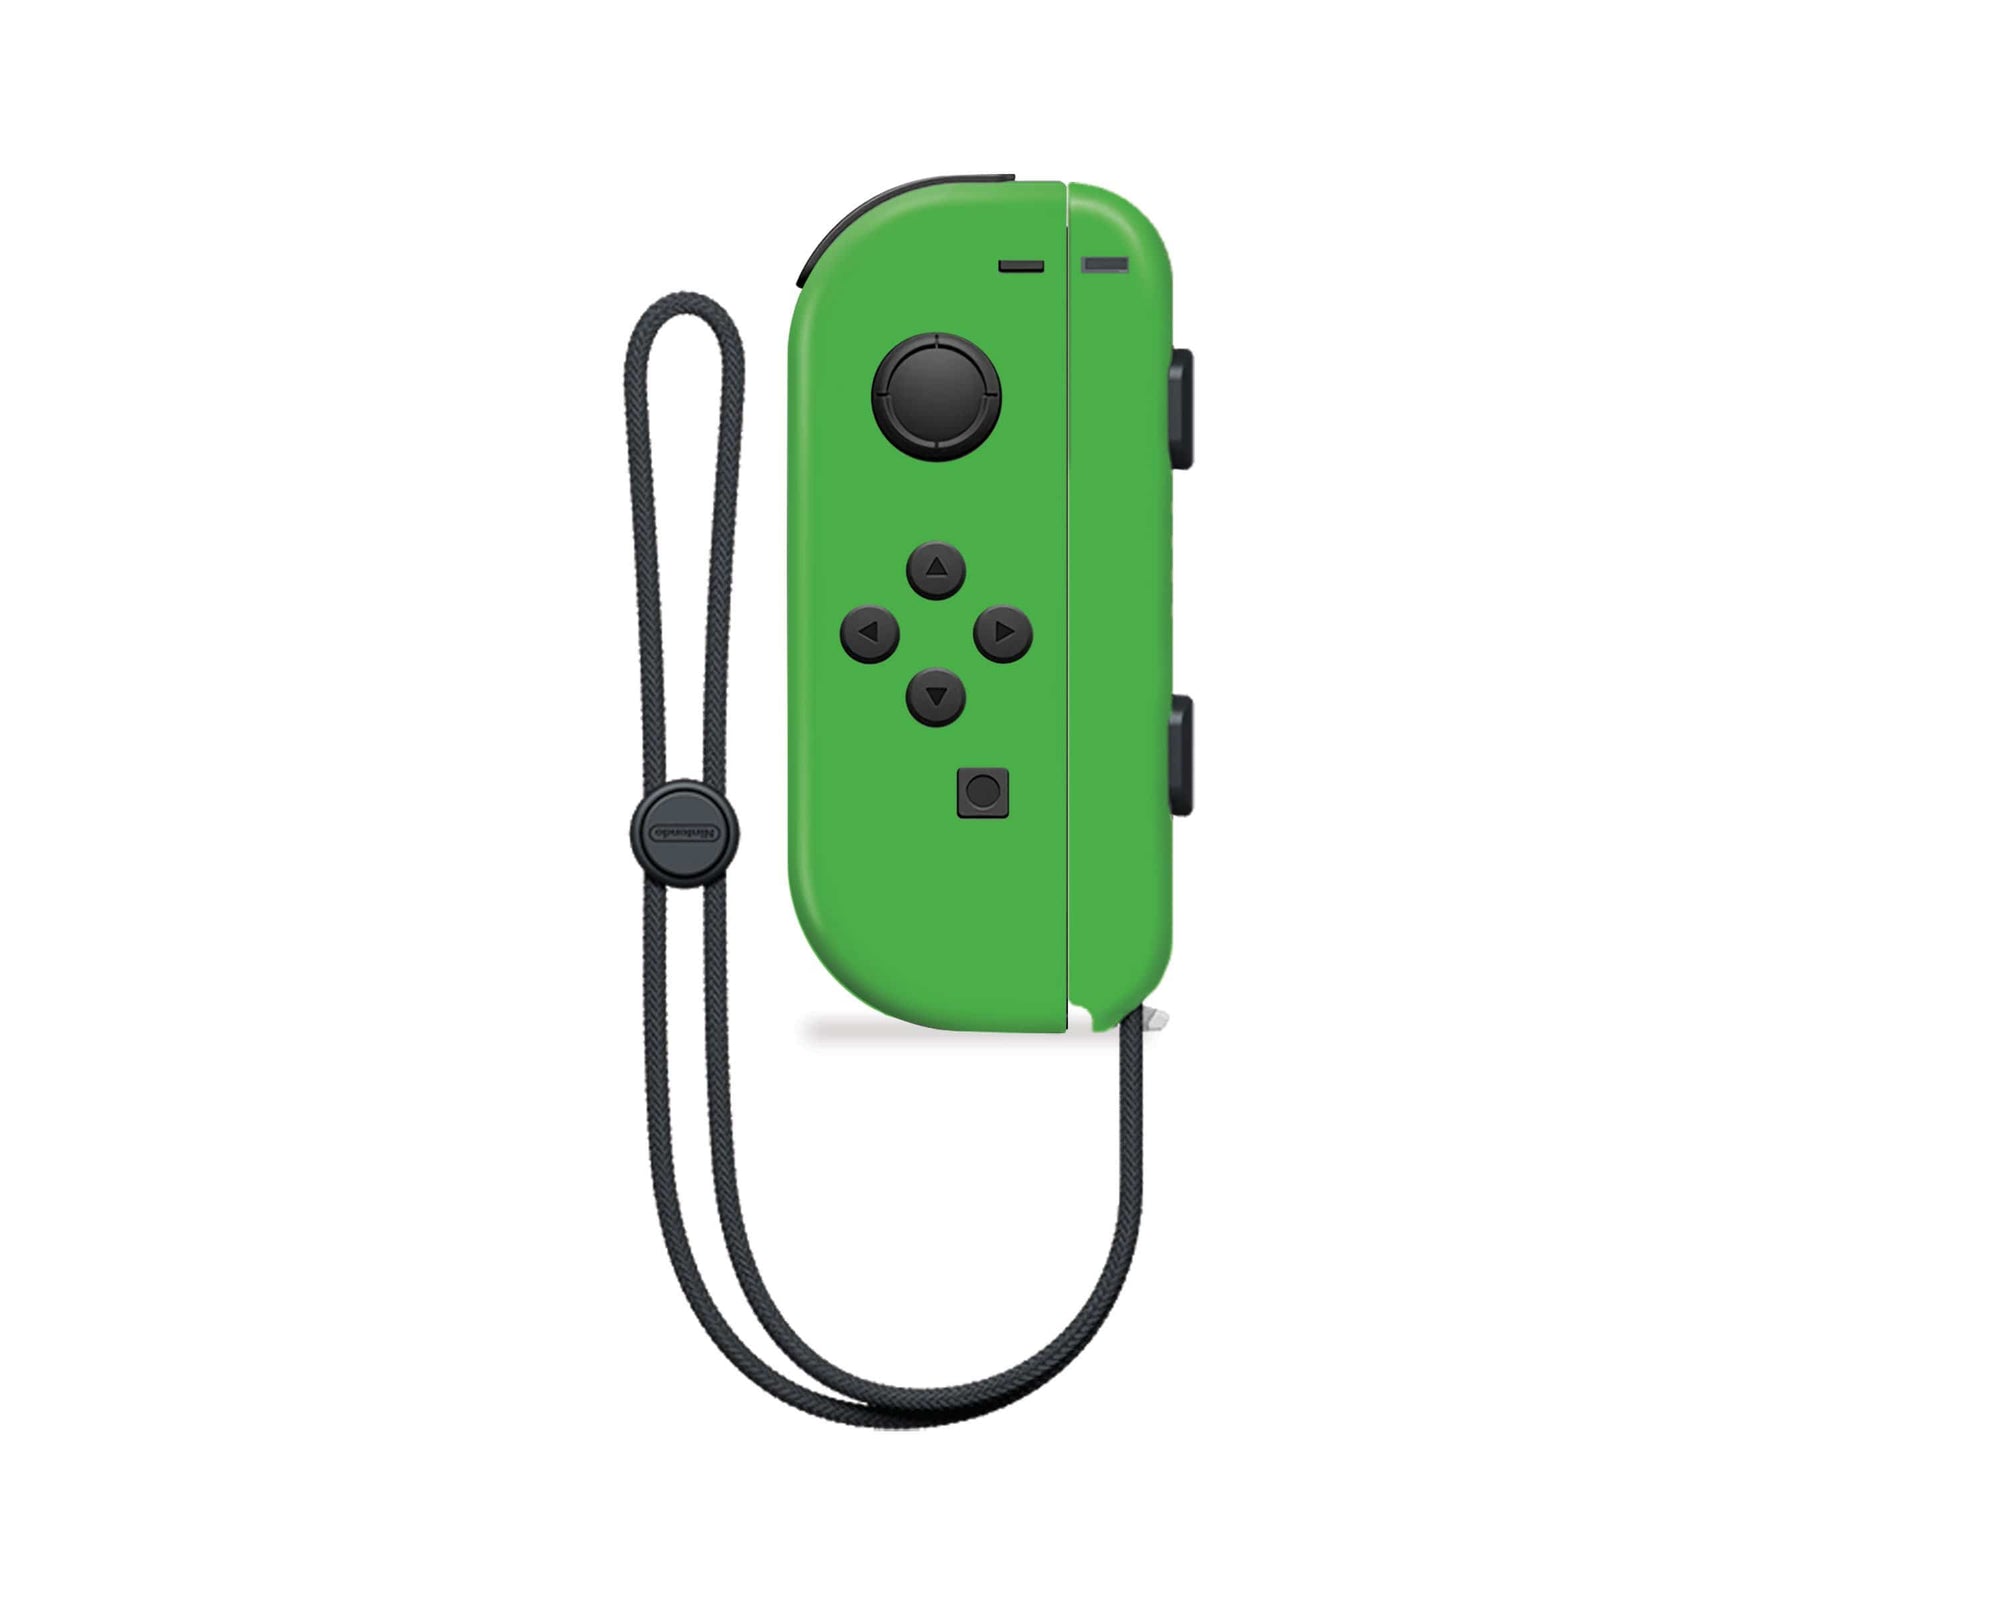 Mix & Match - Classic Solid Color Nintendo Switch Joy-Con Skin - StickyBunny